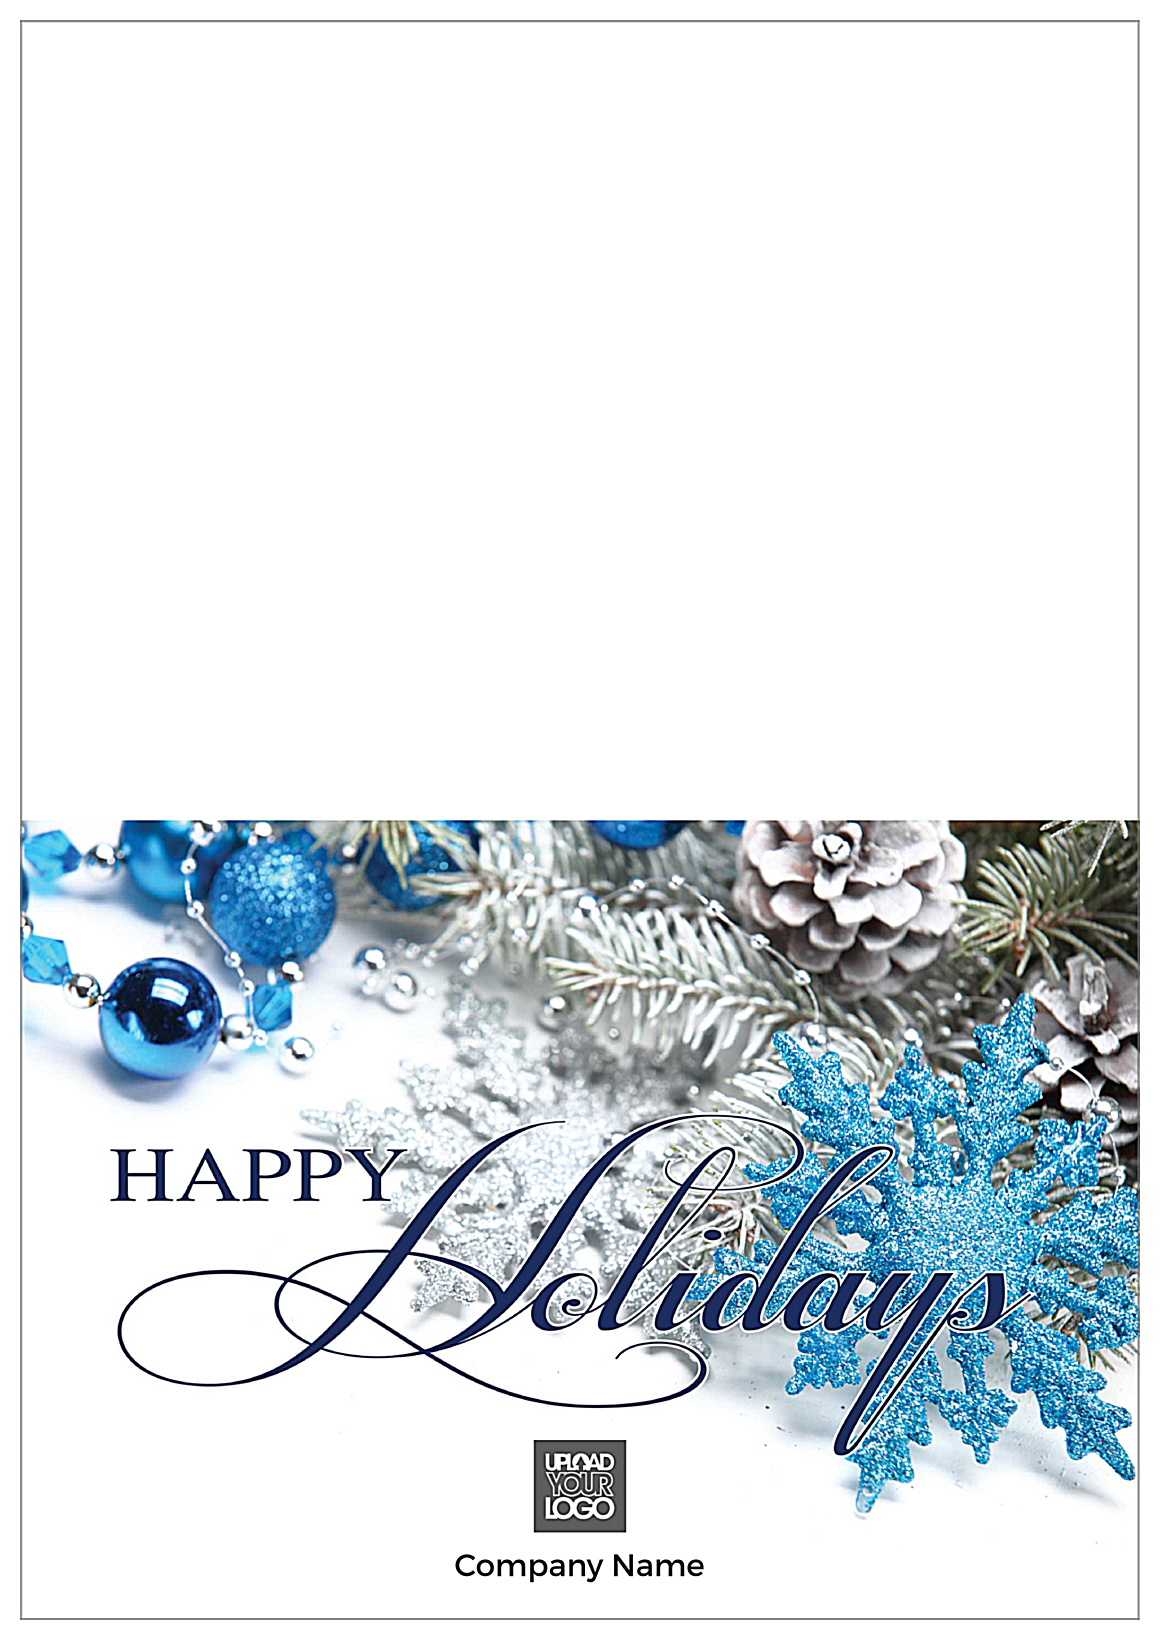 Blue Happy Holidays front - Greeting Cards Maker